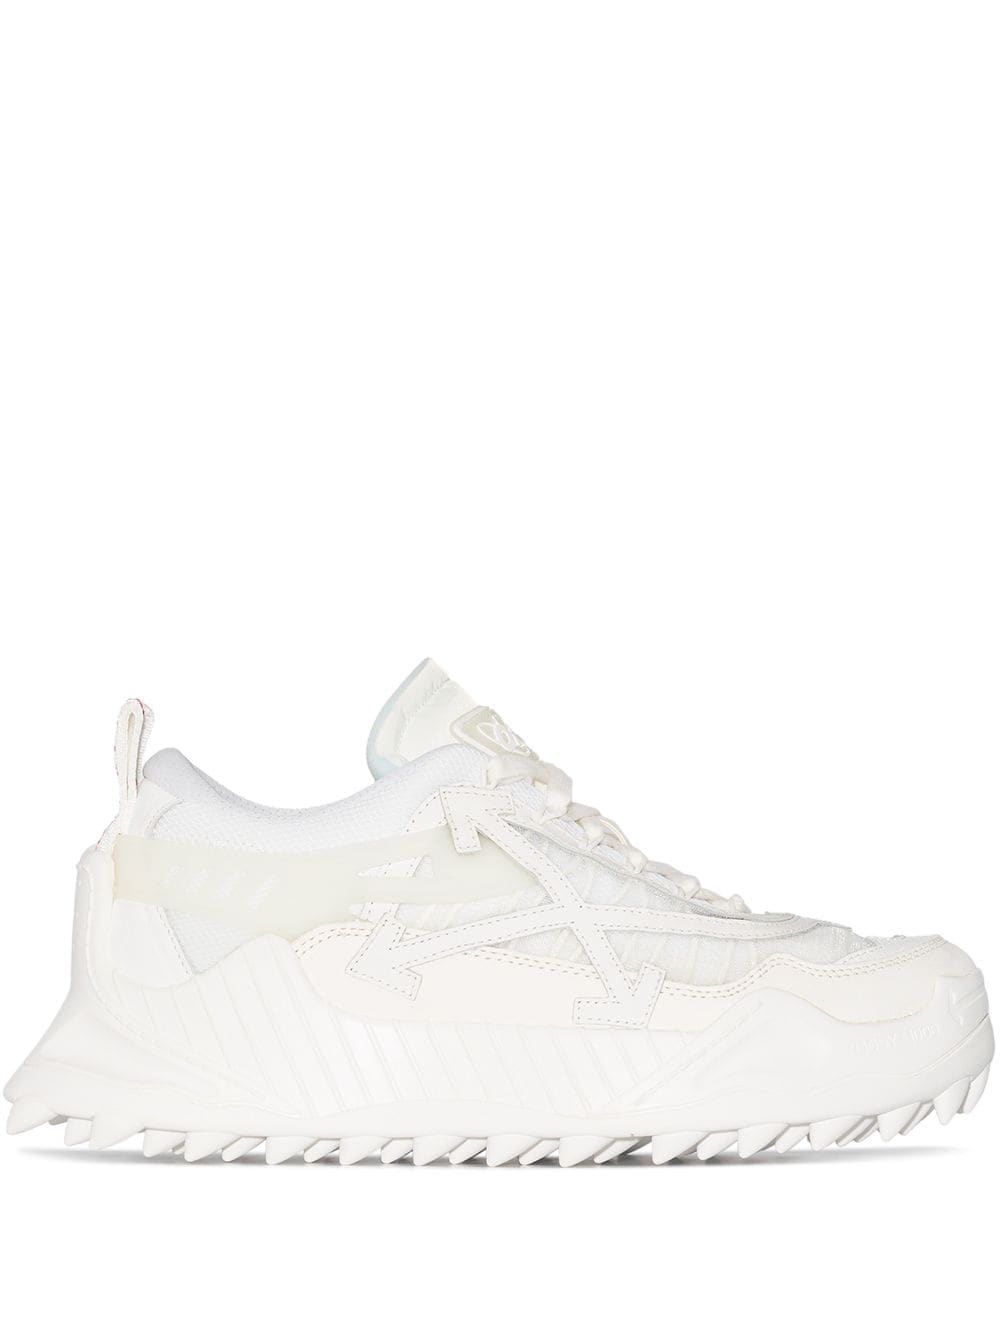 Image 1 of Off-White Odys low-top sneakers